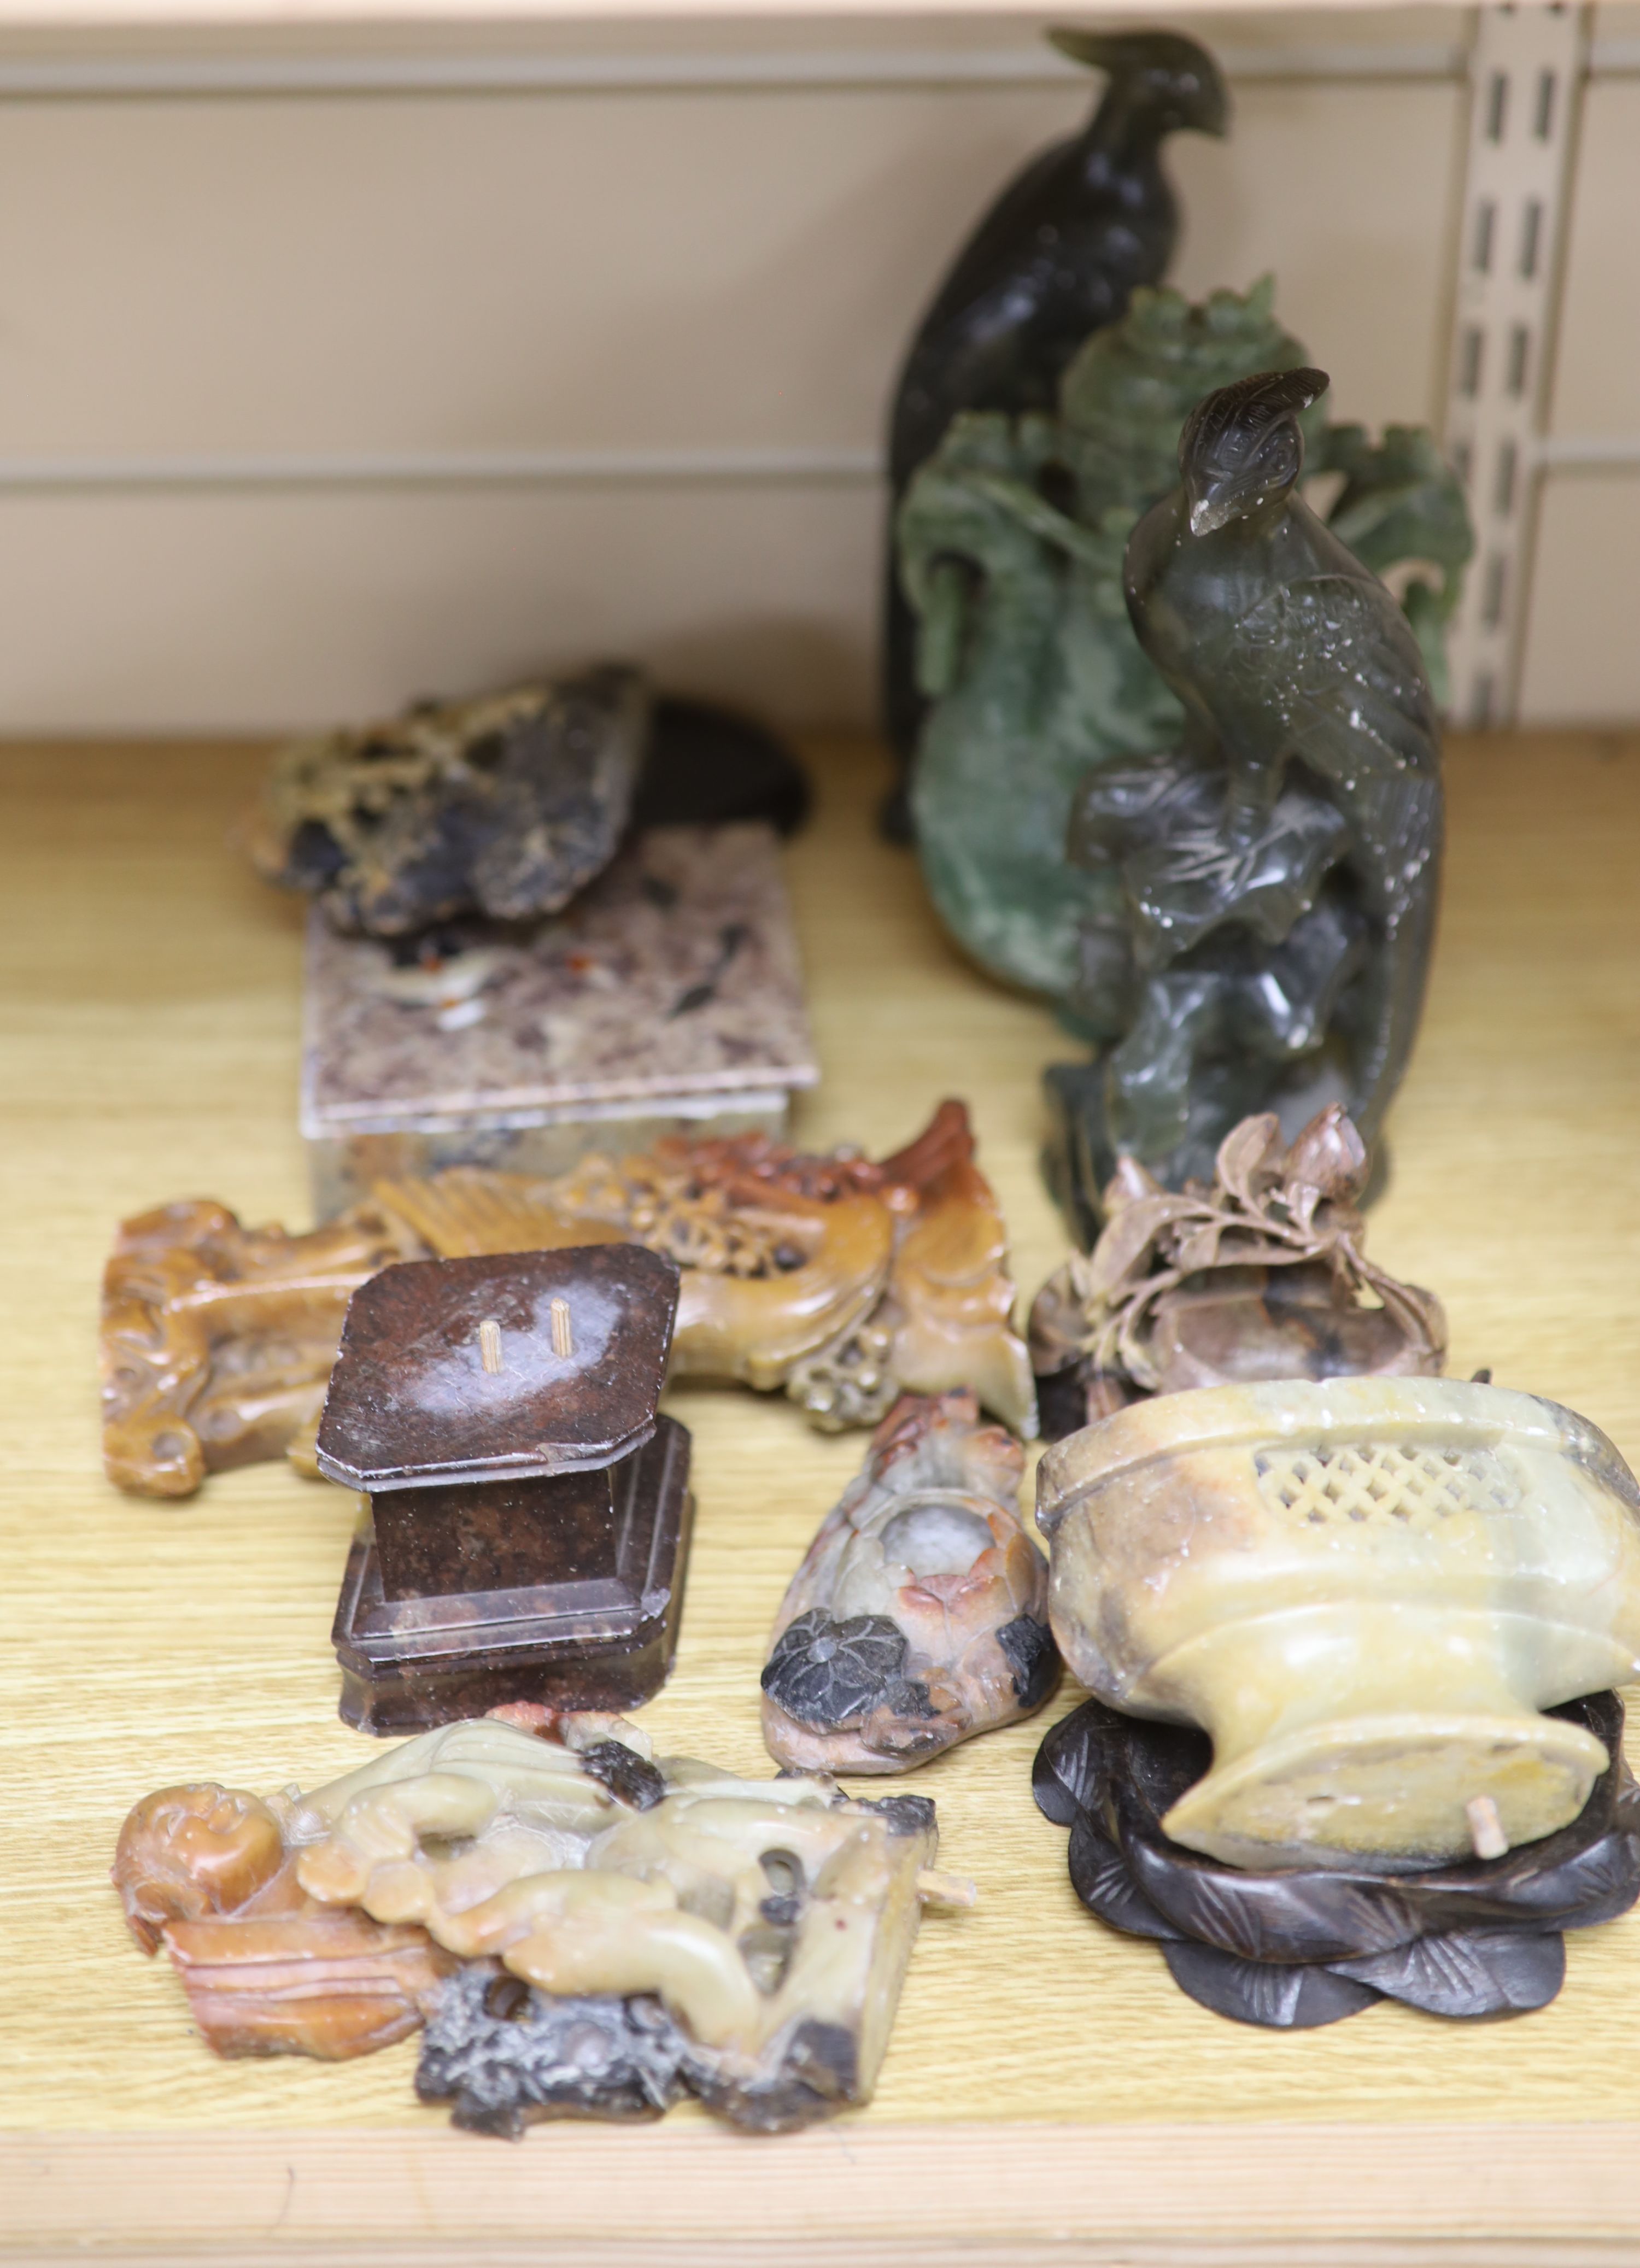 A collection of hardstone and soapstone carvings